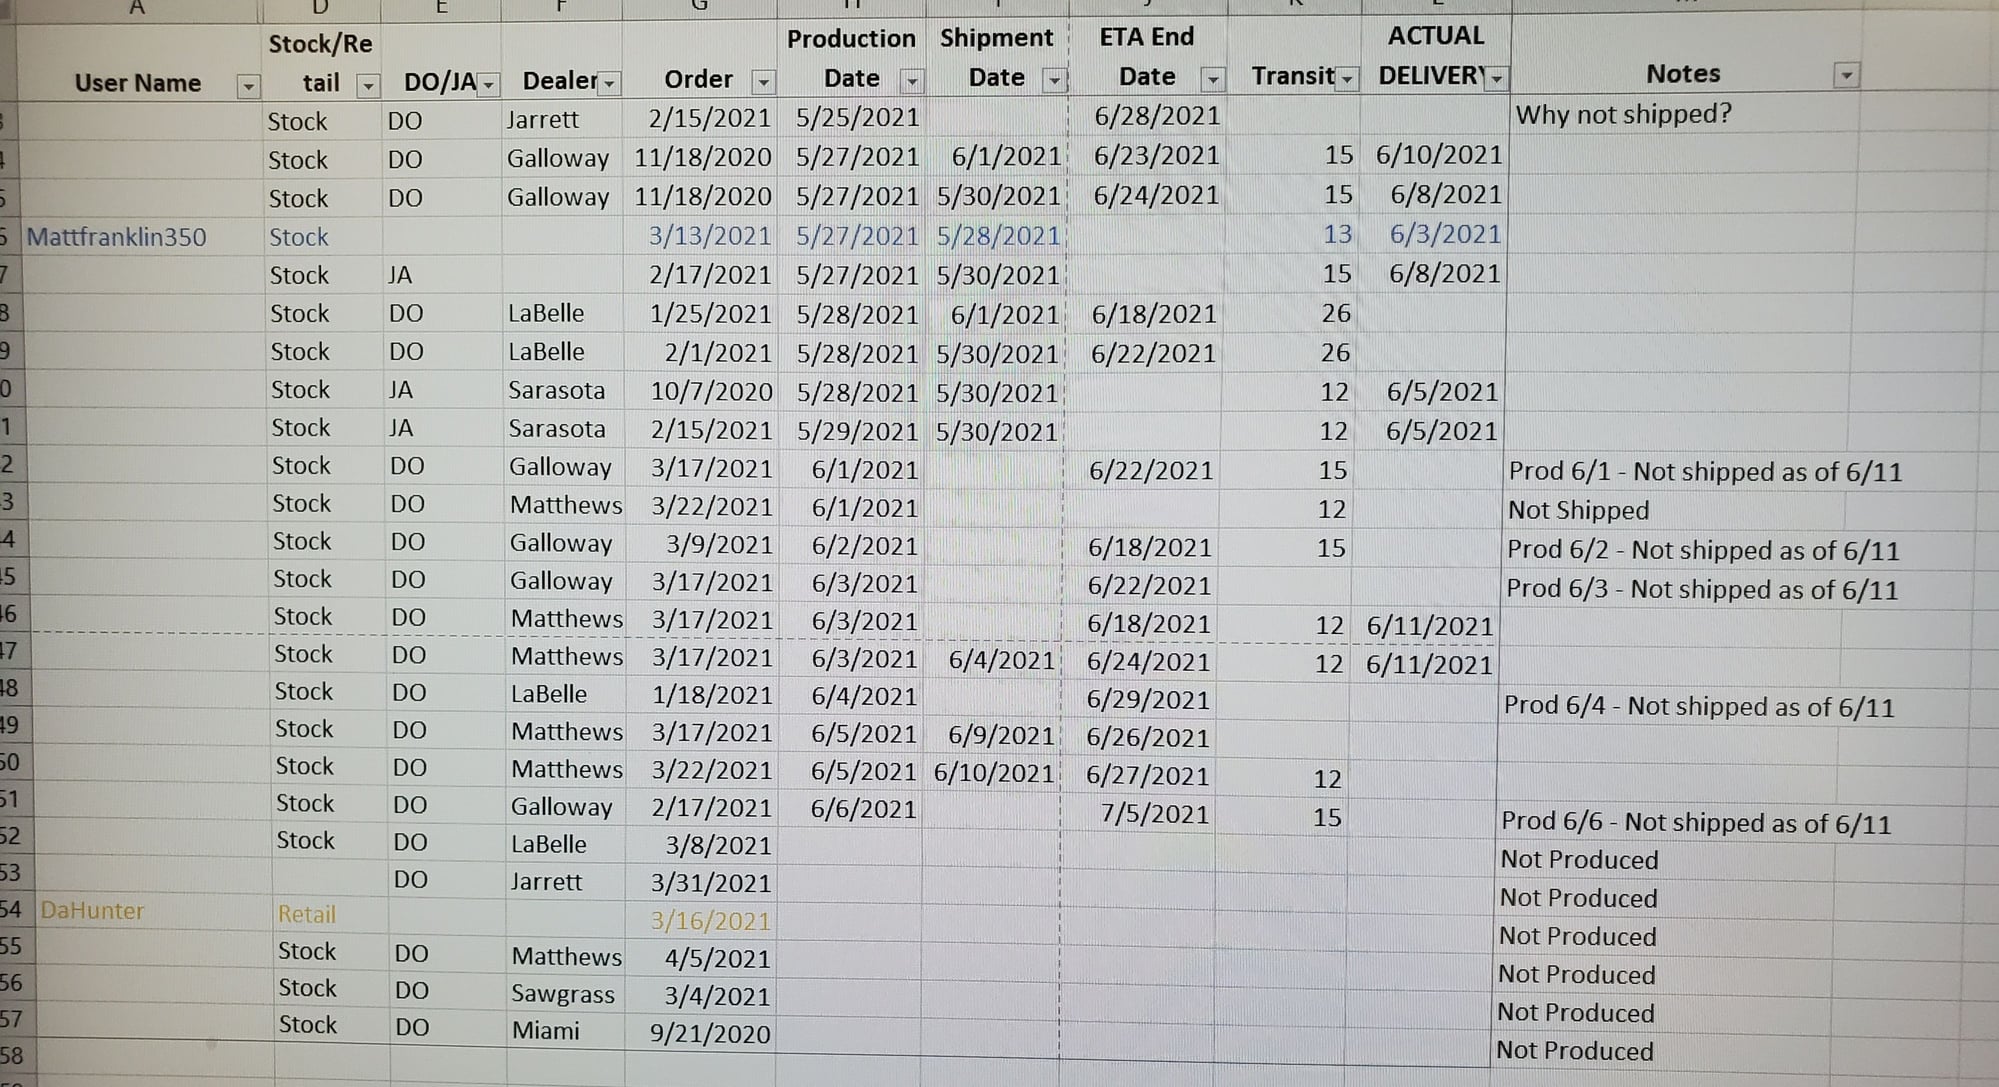 2021 Ford Super Duty Order Tracking Thread. Please NO Off Topic - Page